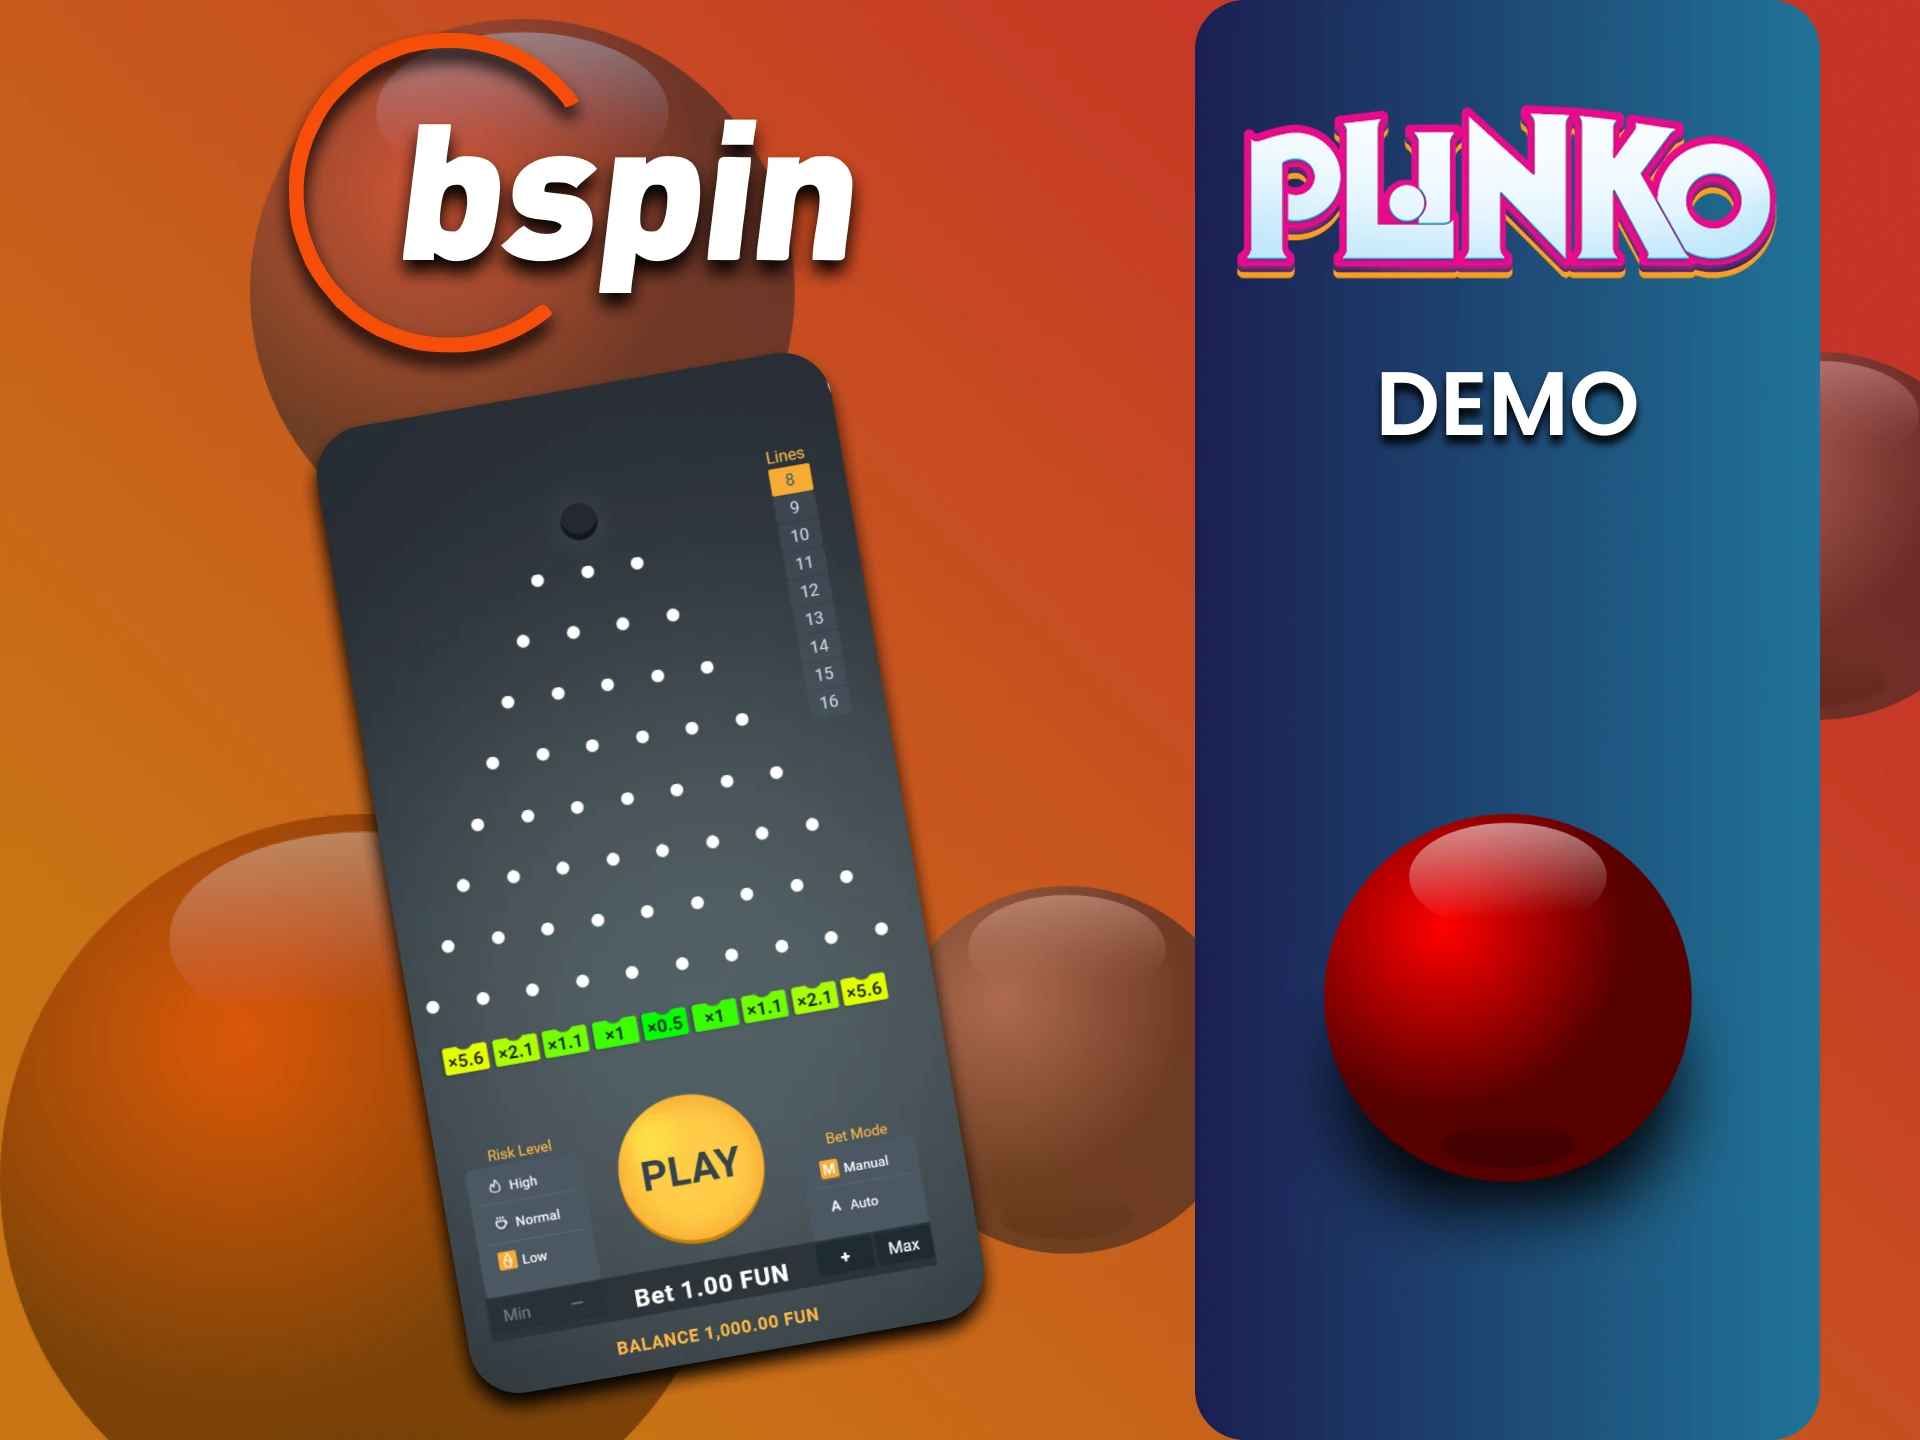 The demo version of Plinko on Bspin is ideal for training.